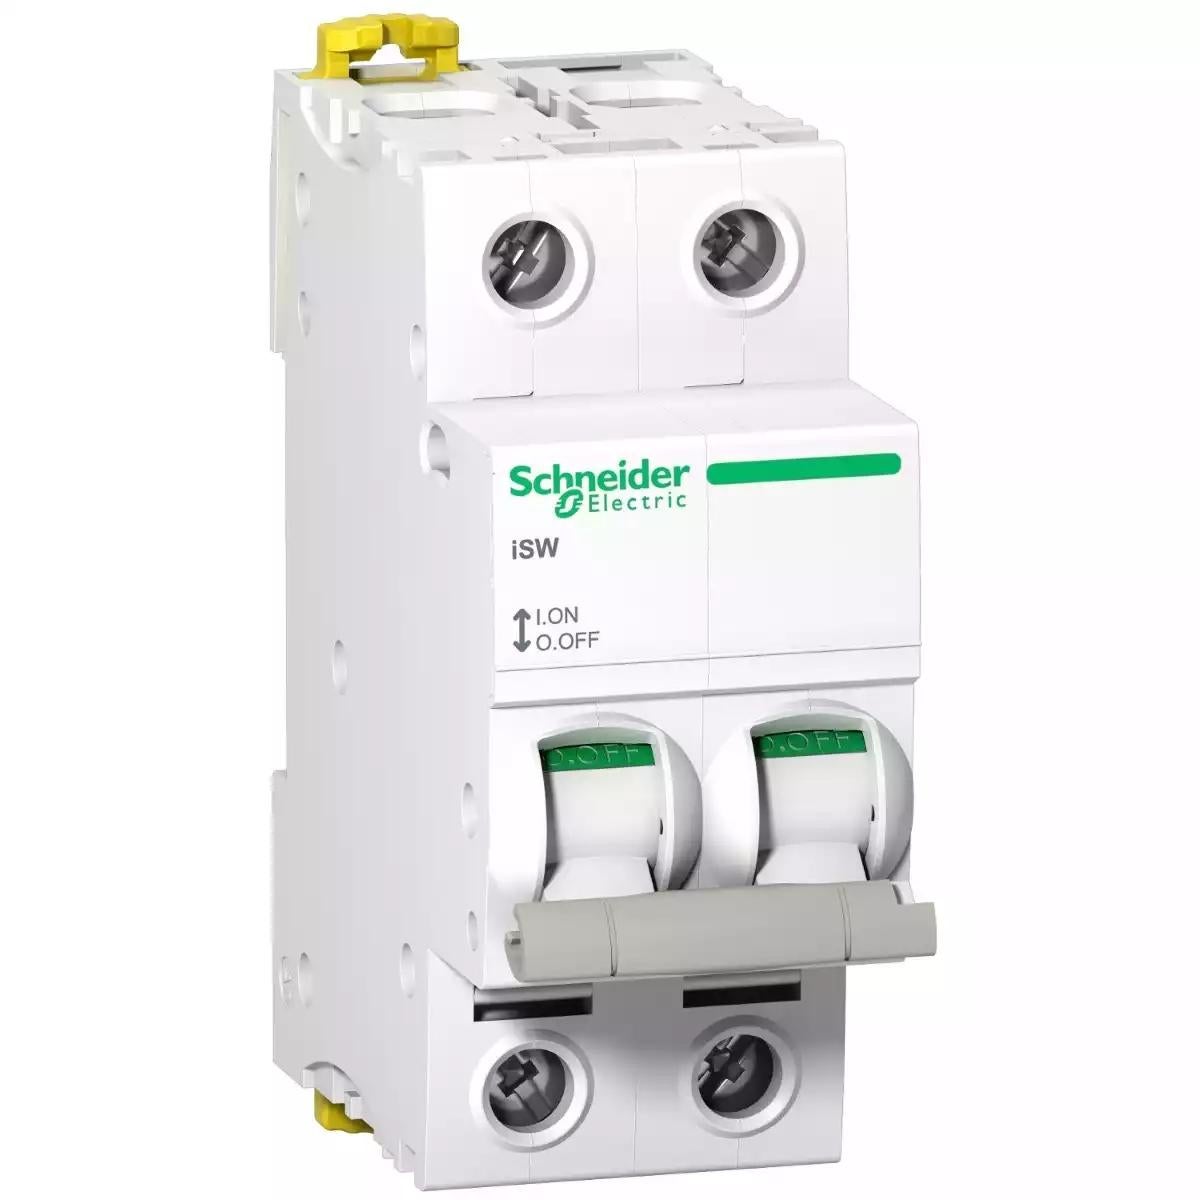 Schneider Electric Acti 9 iSW - 2P - 100 A - 415 V